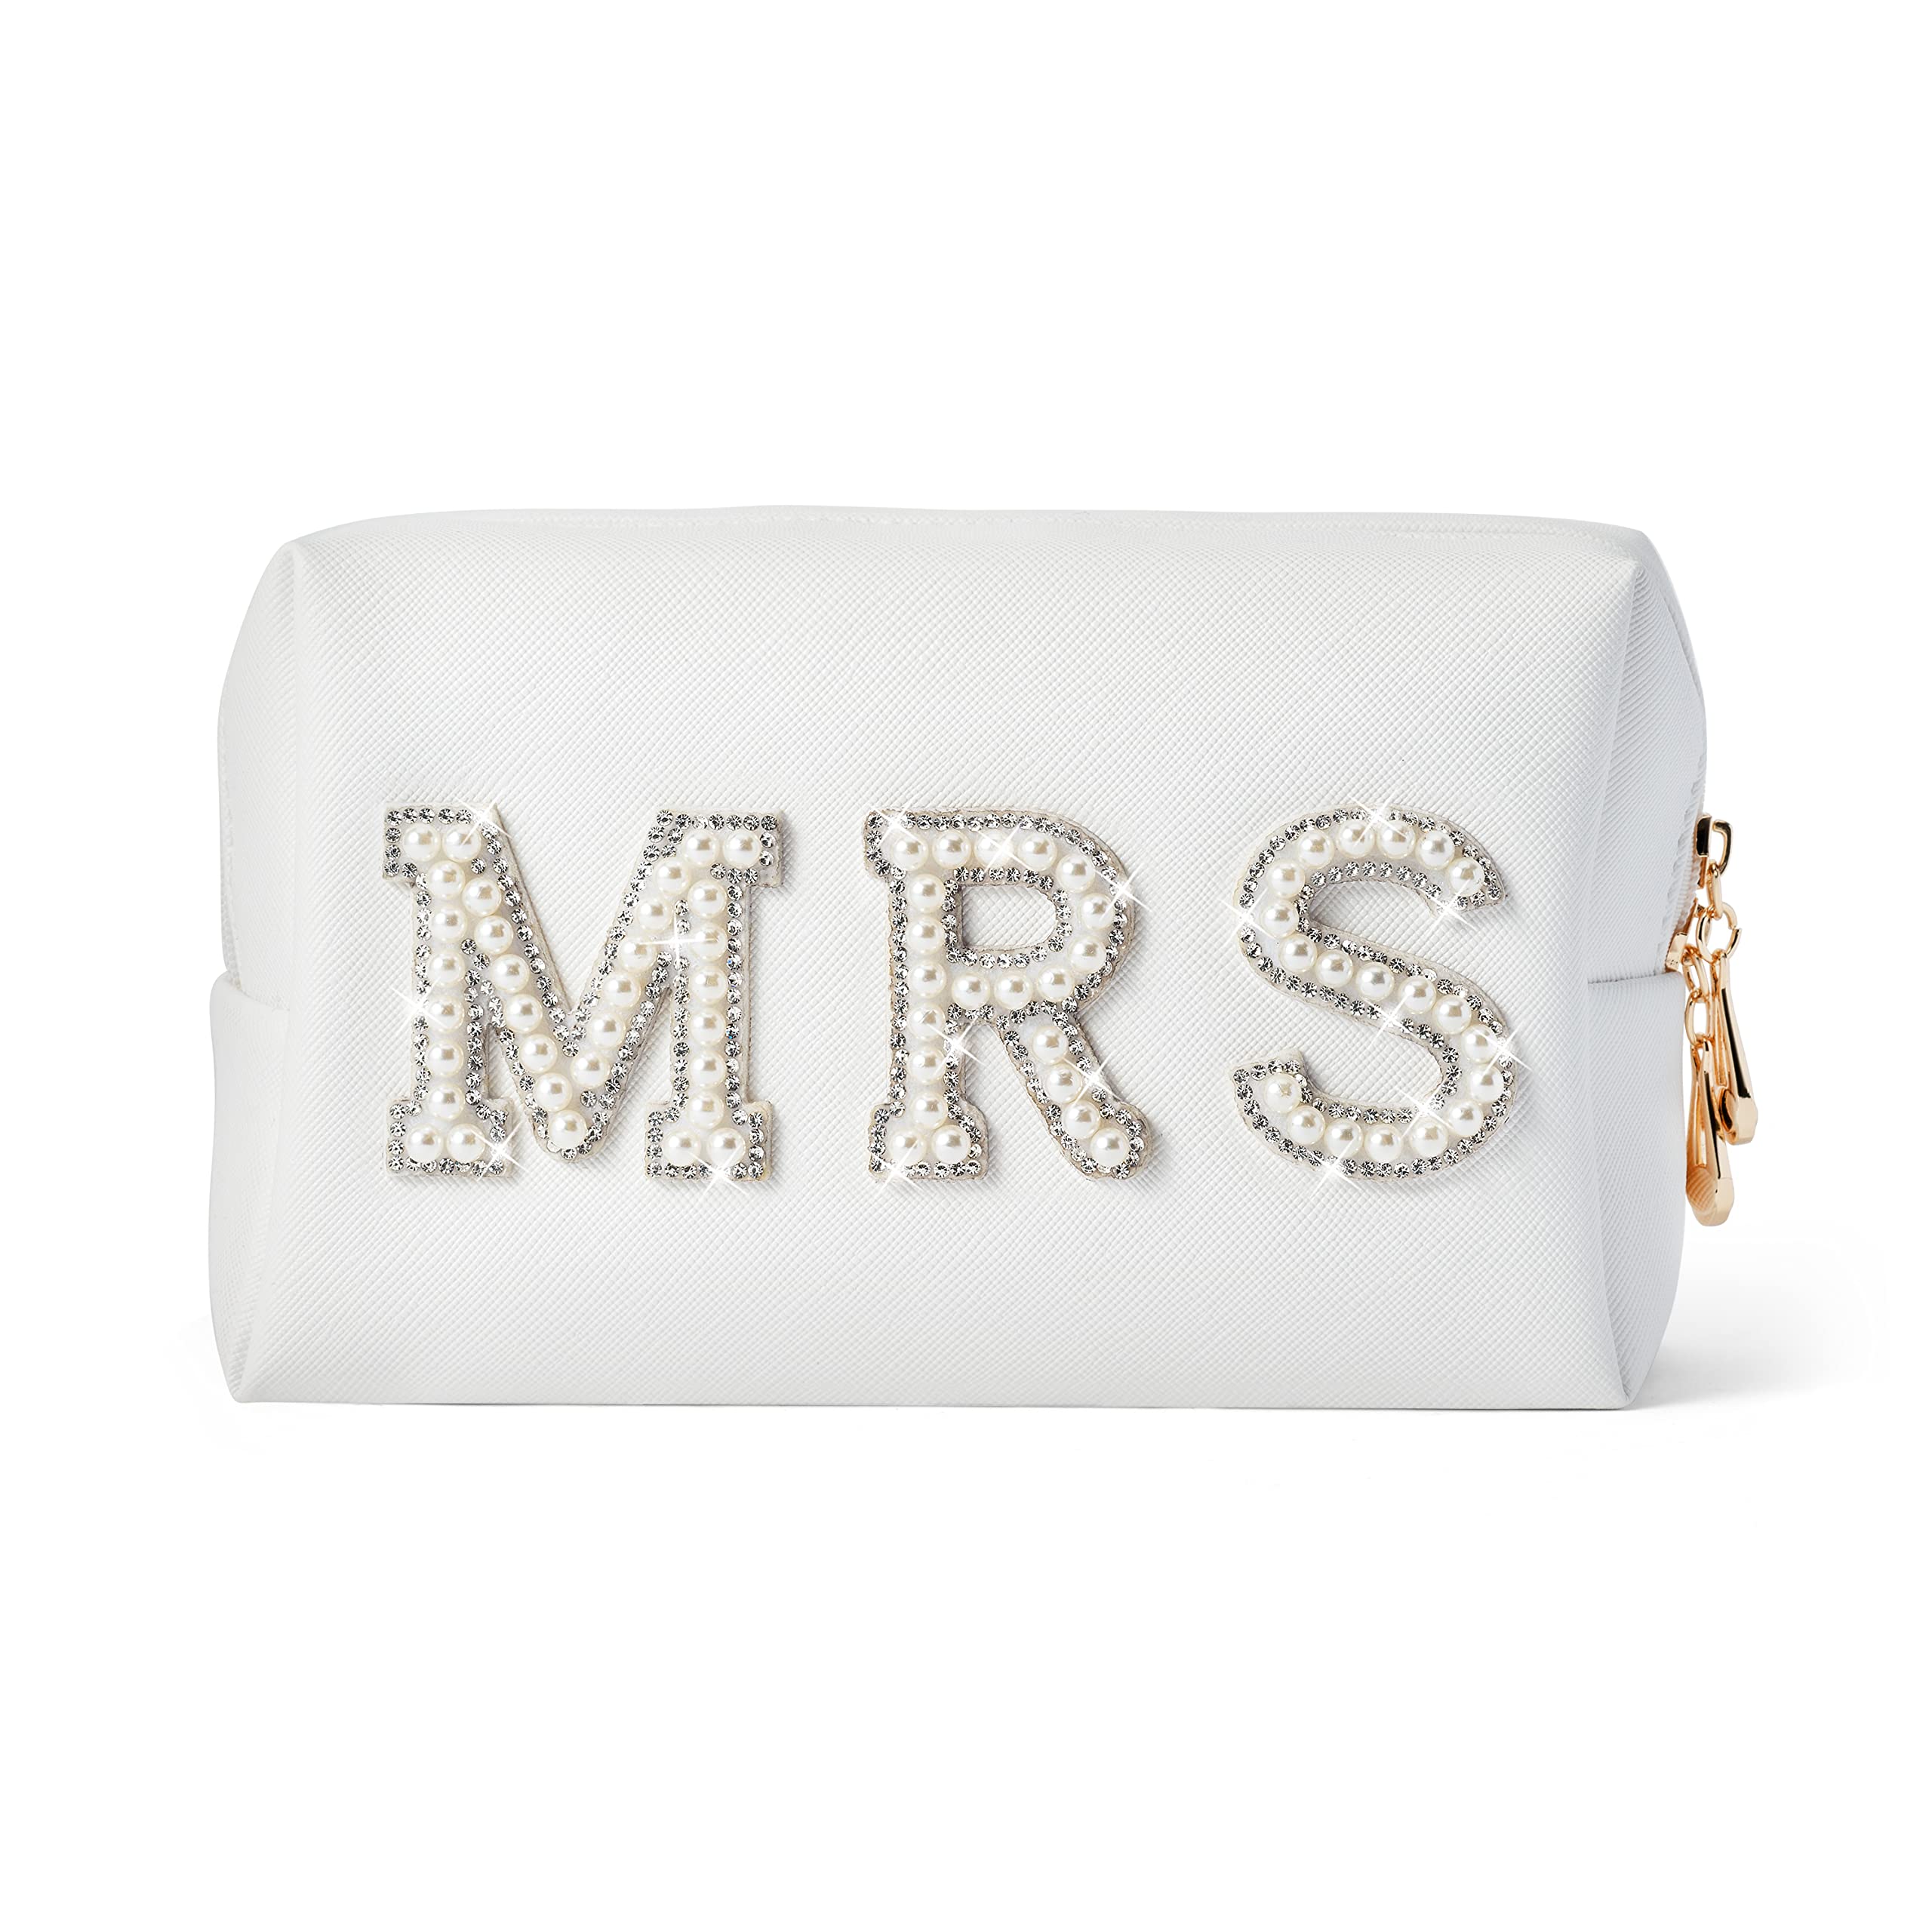 Y1tvei Bride Patch MRS Varsity Letter Cosmetic Toiletry Bag Pearl